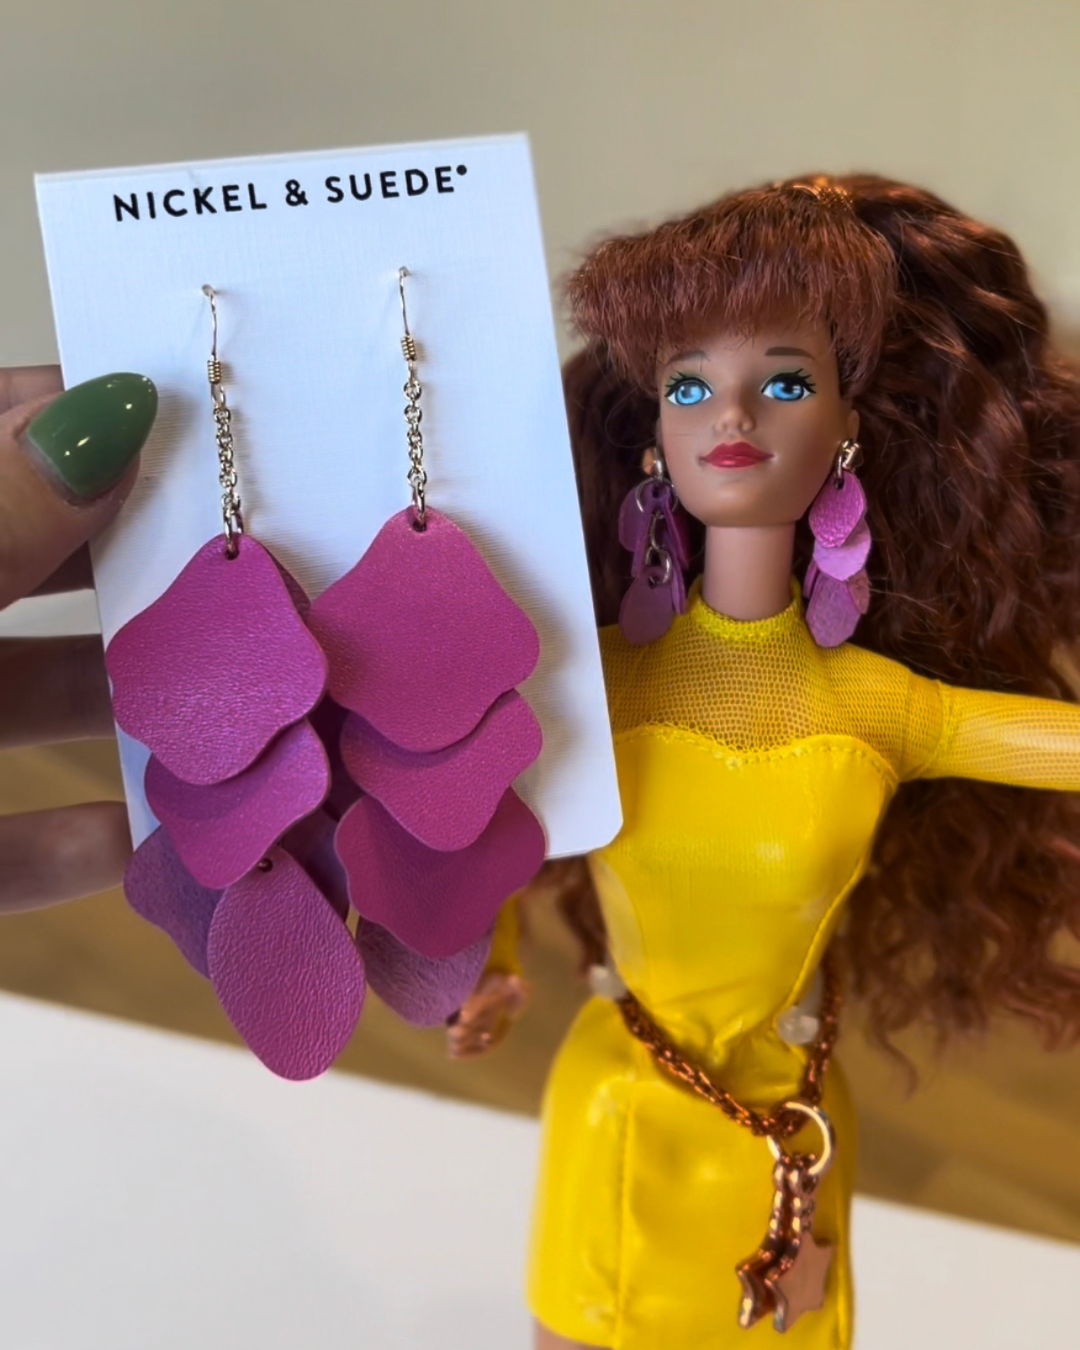 barbie and nickel and suede leather earrings